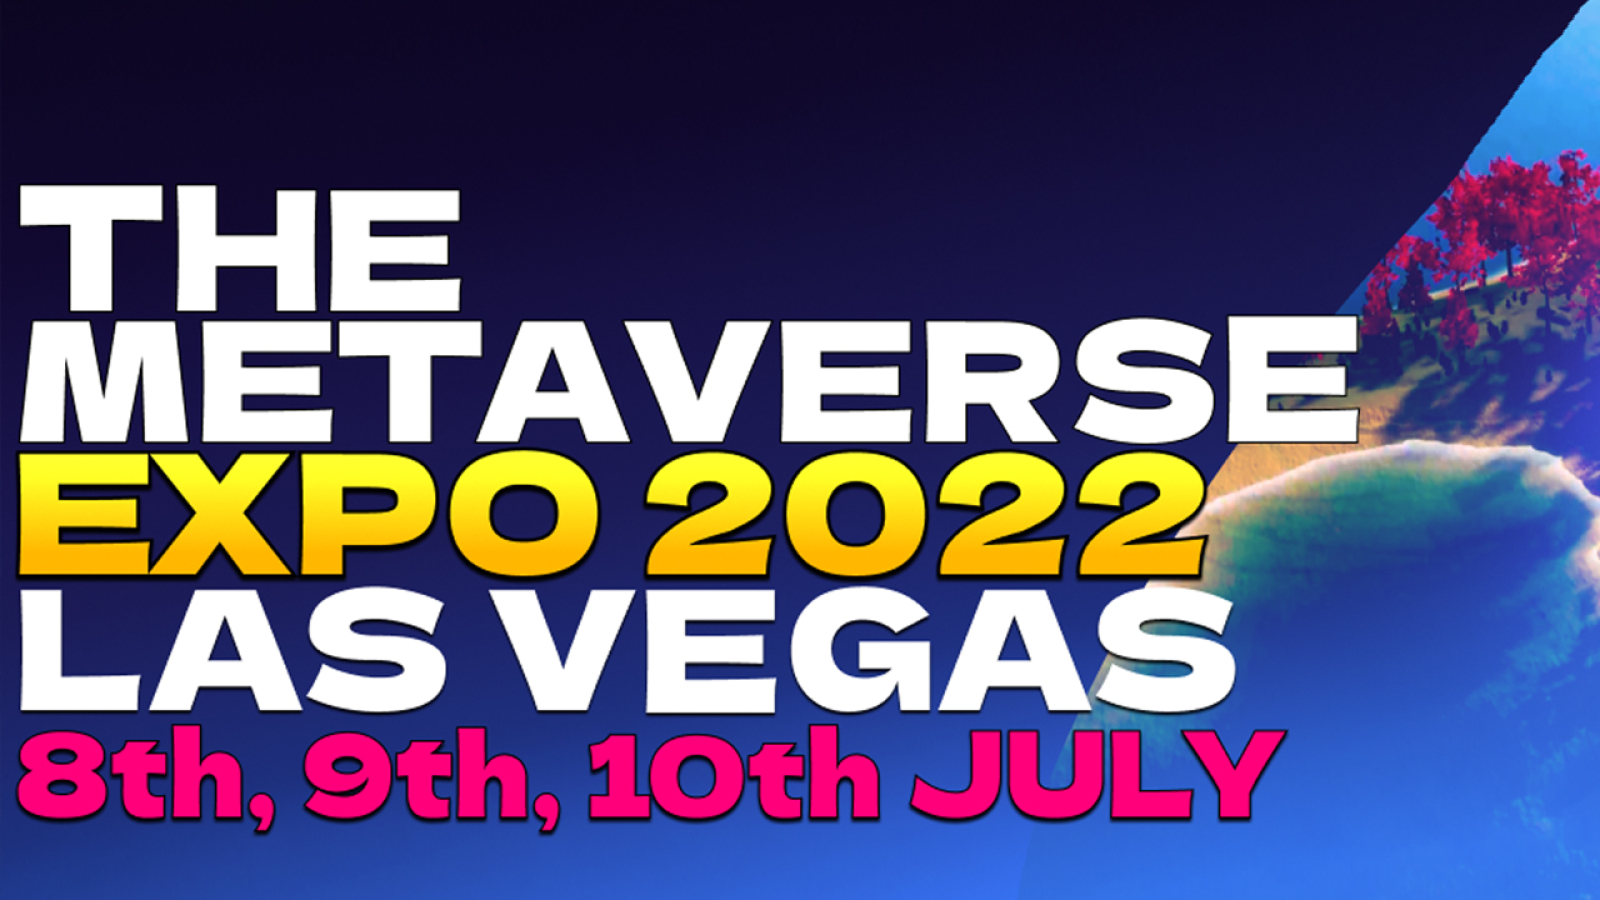 TCG World Partners with Shark Tank Backed Jigsaw Puzzle International Convention (JPiC) to Co-Host The Metaverse Expo 2022, Las Vegas